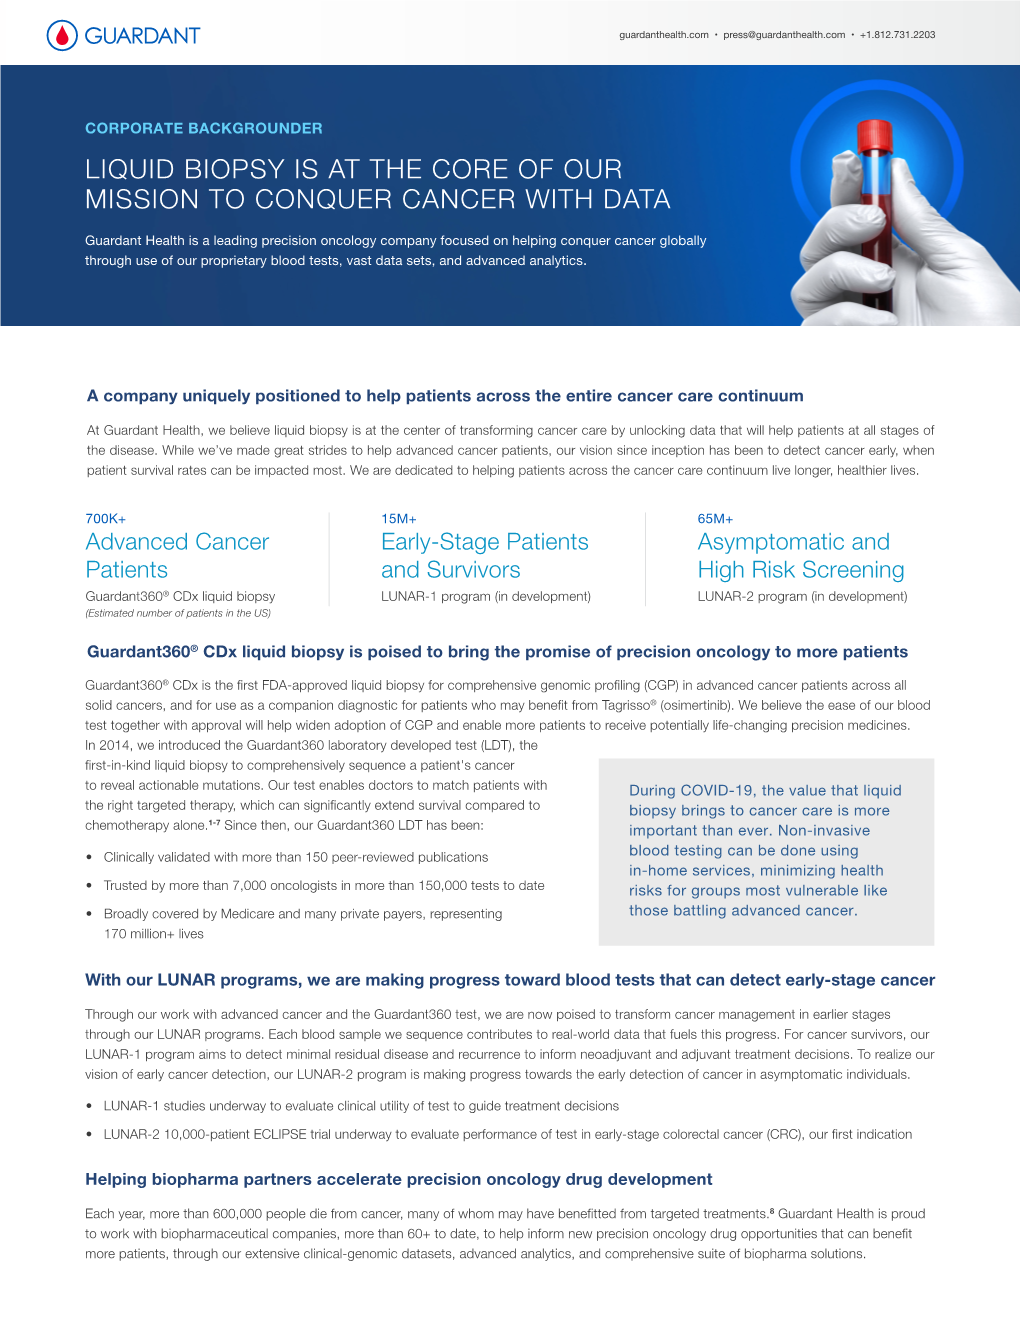 Liquid Biopsy Is at the Core of Our Mission to Conquer Cancer with Data